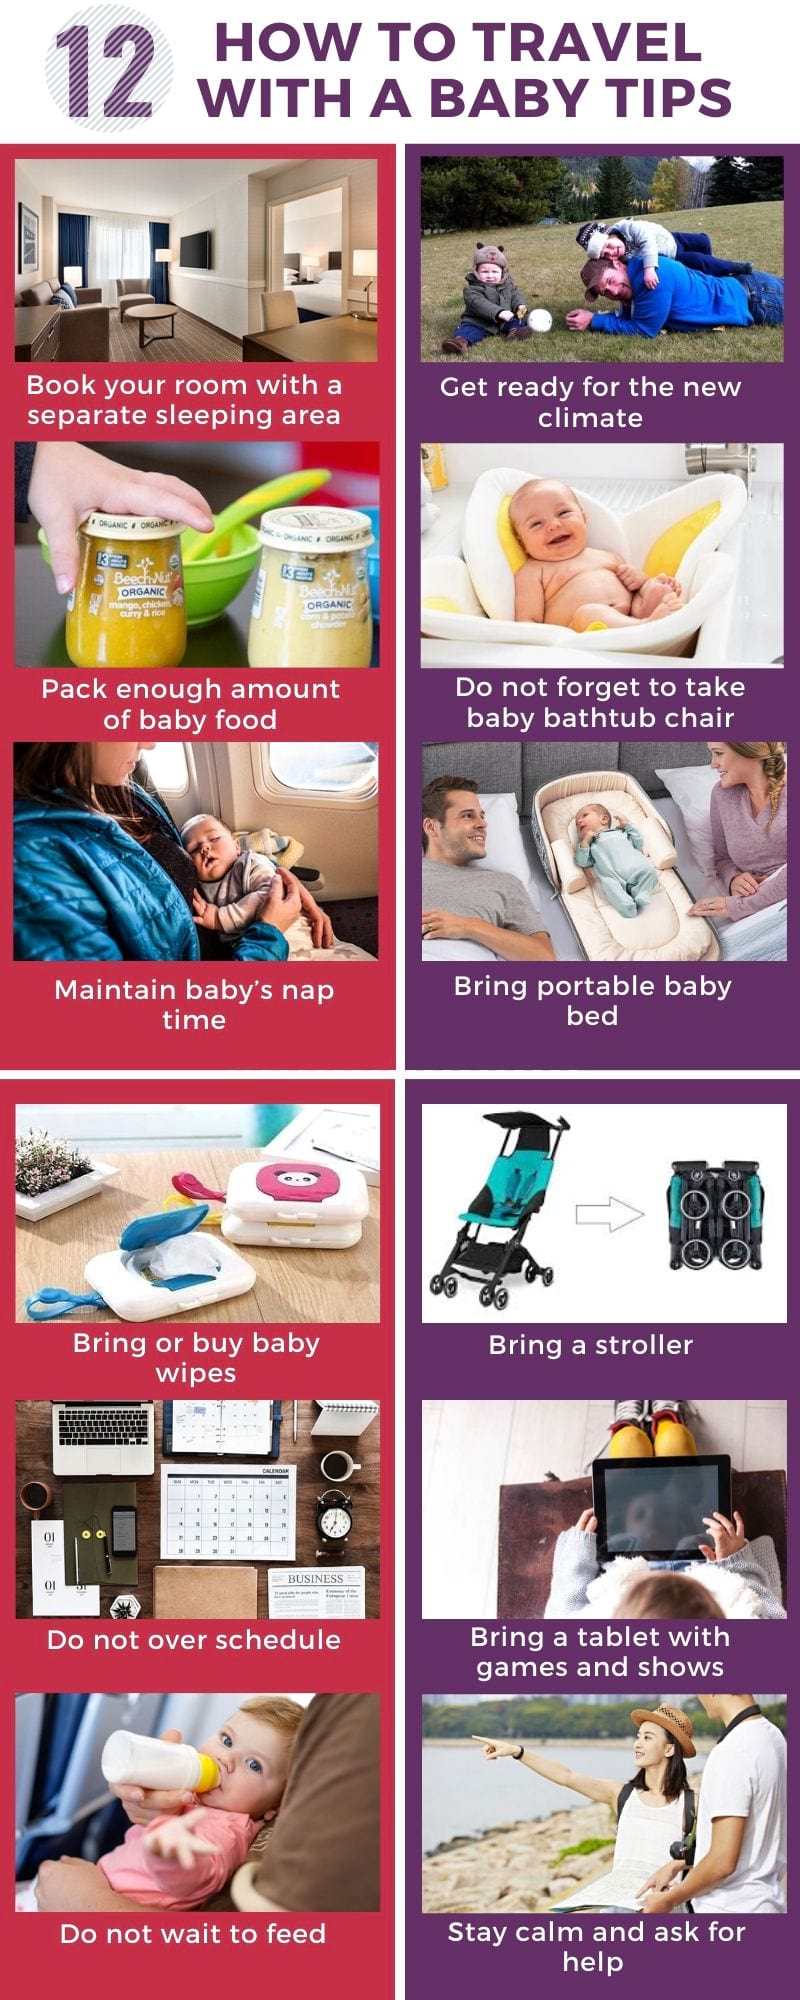 how to Travel with a baby tips